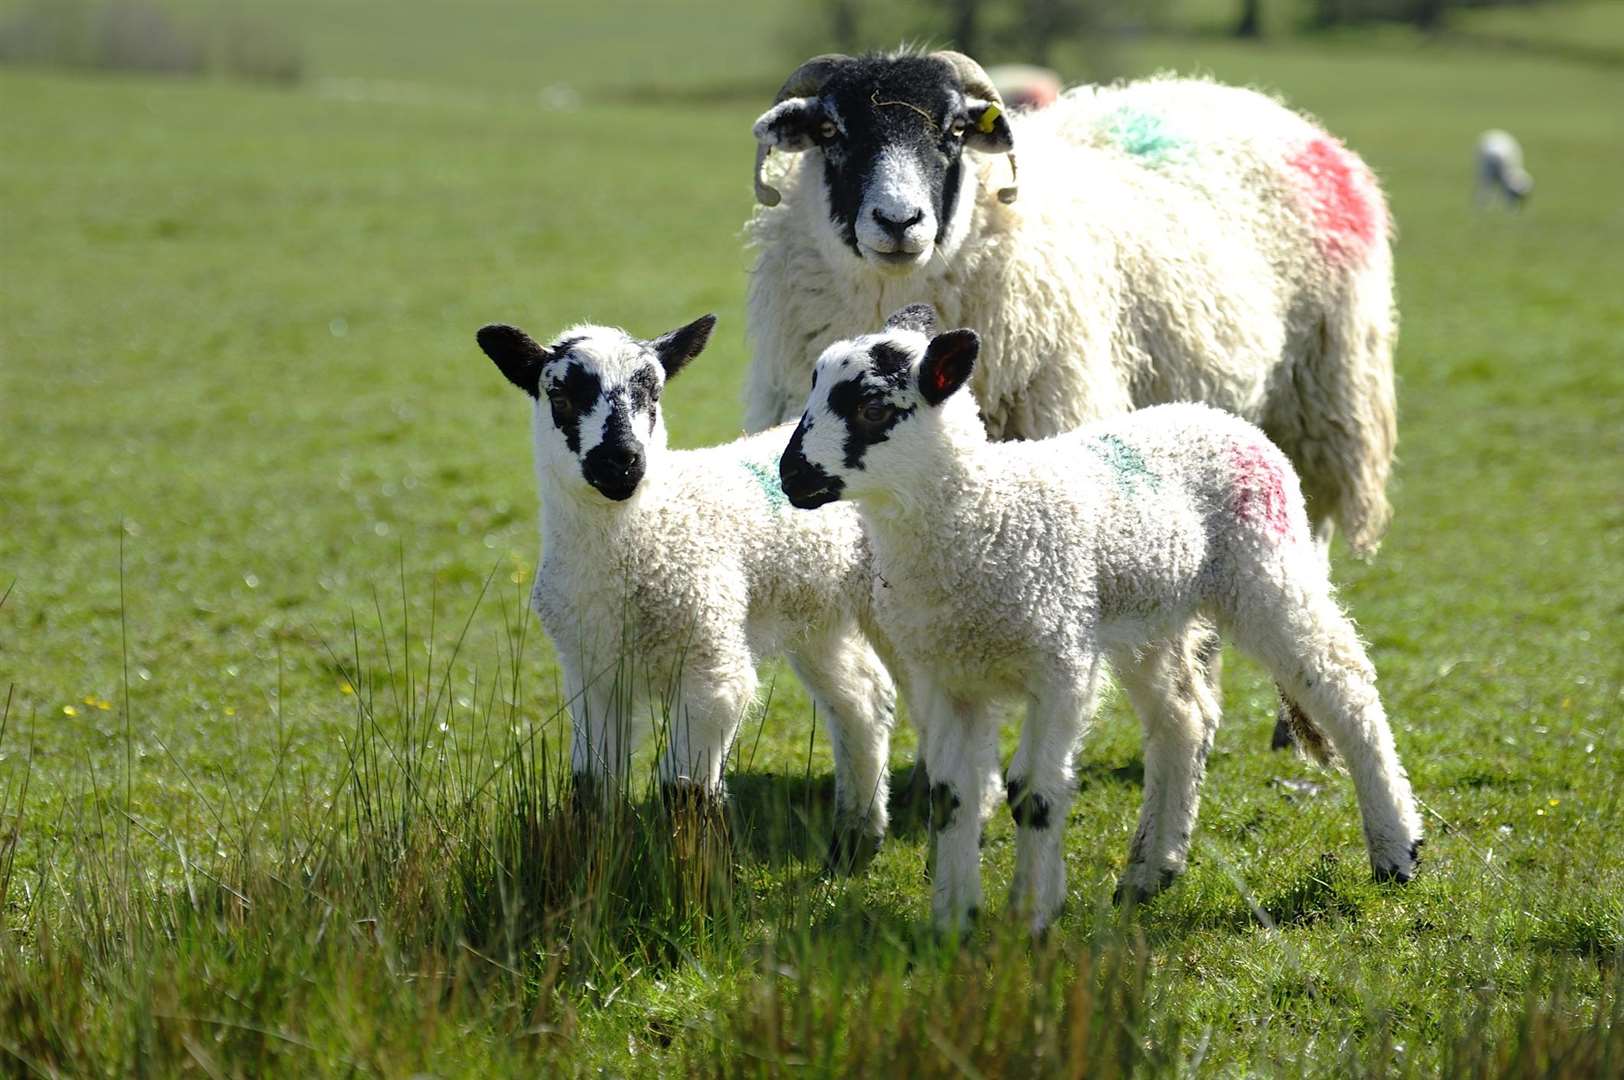 Sheep shearing and a mobile farm will be among the attractions